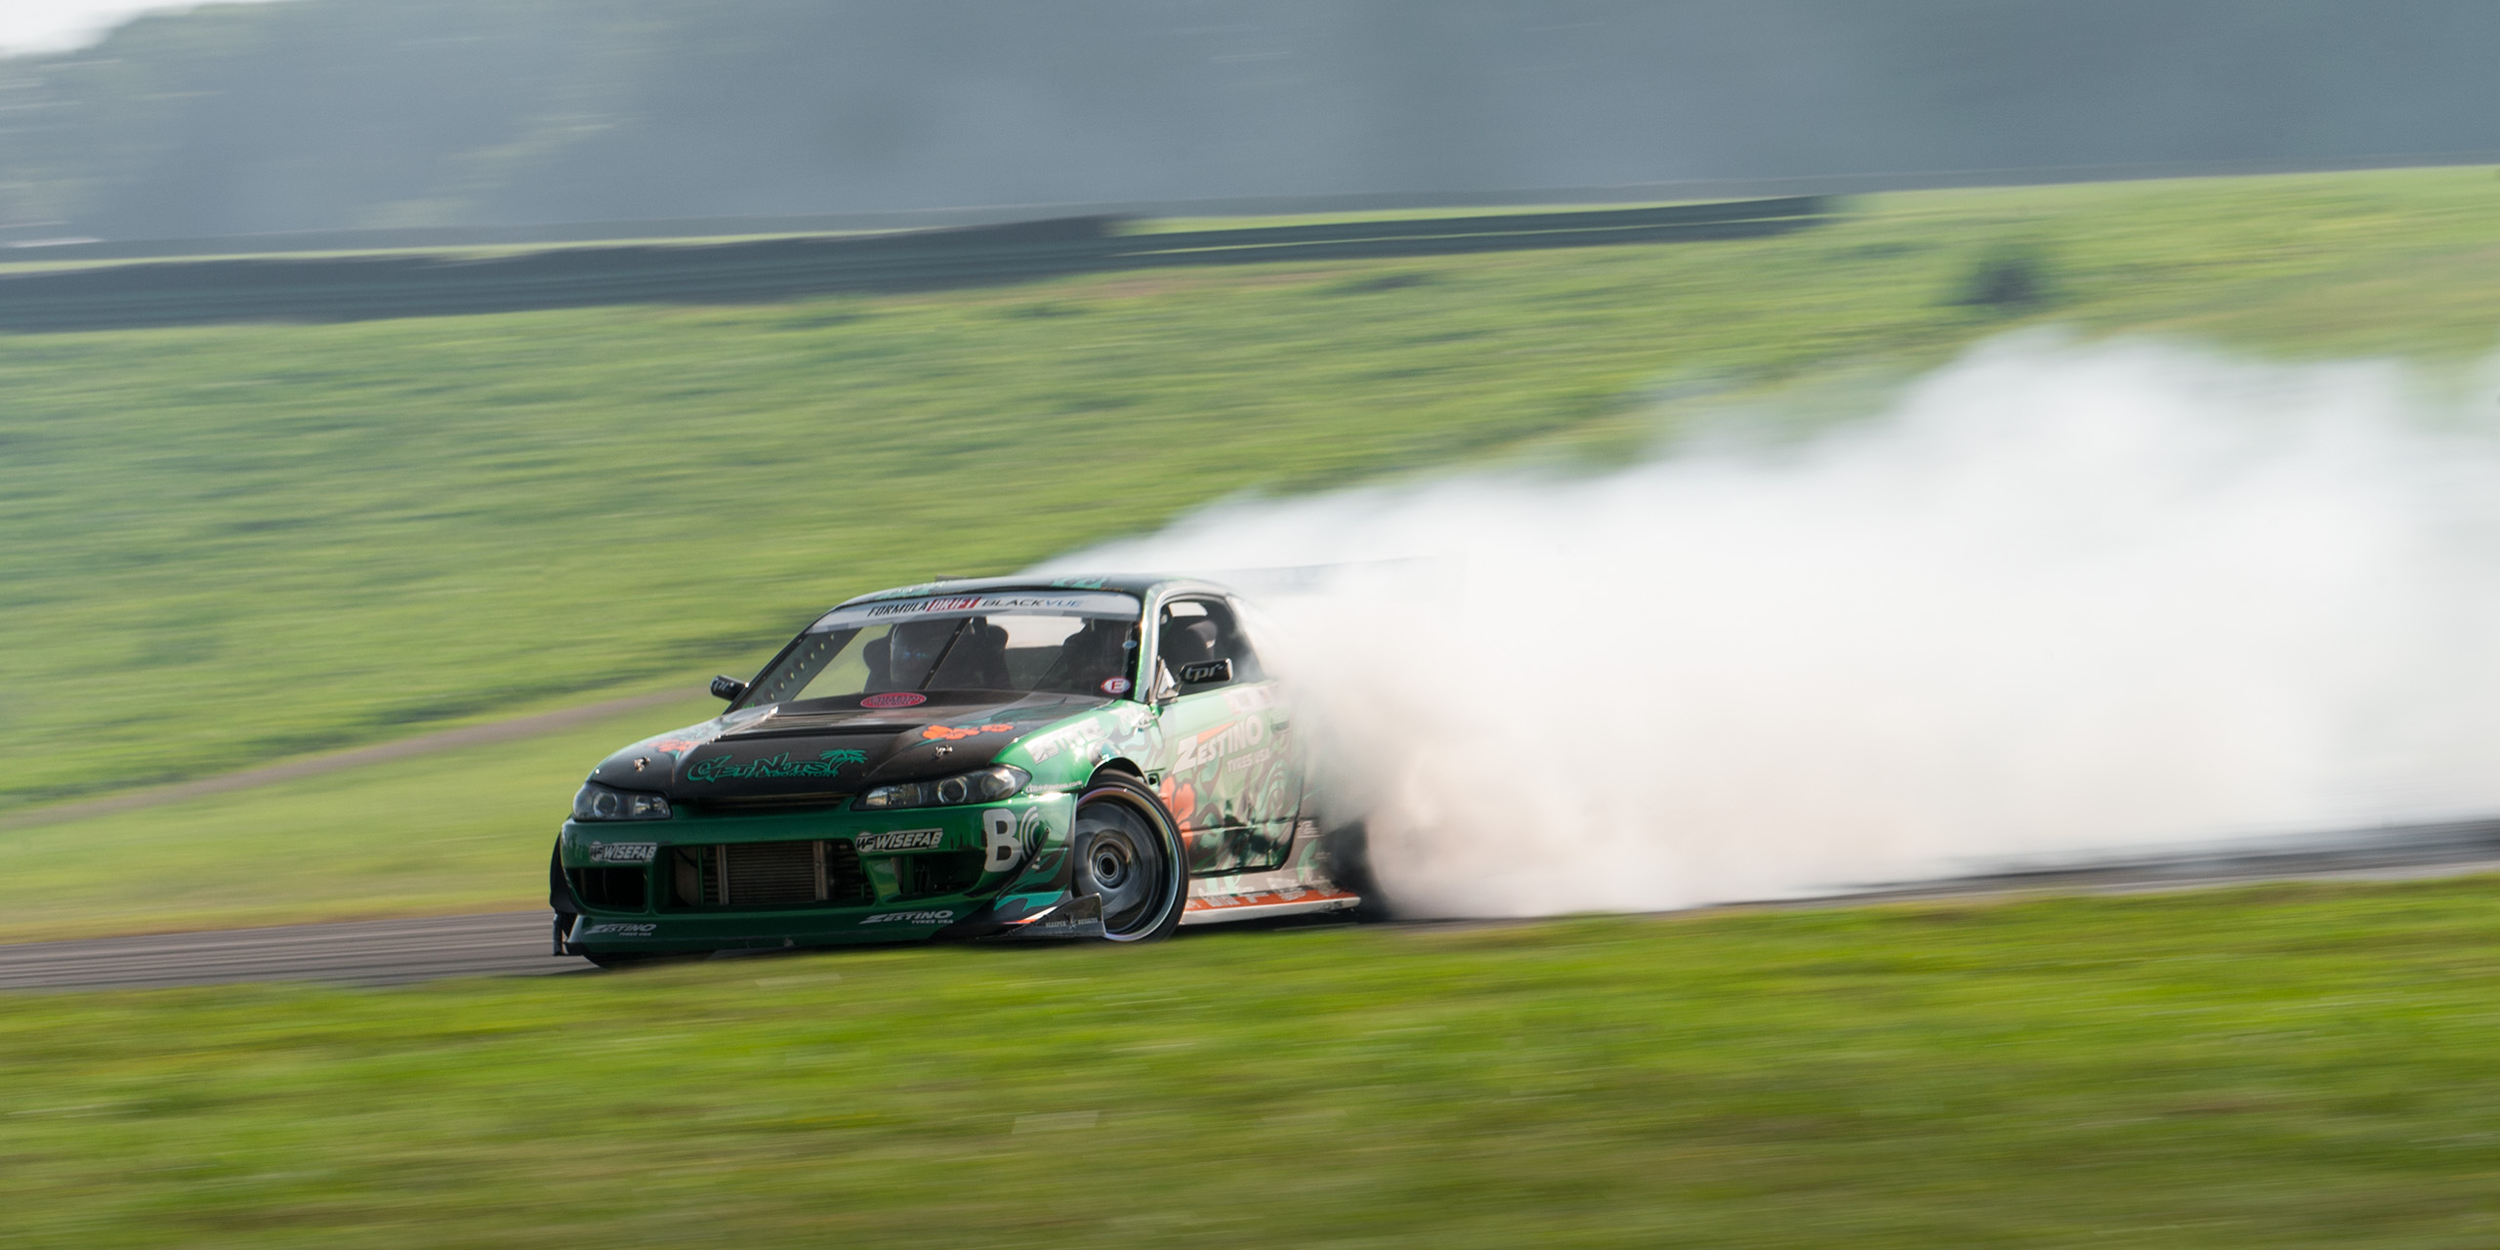 Drift Ride-Alongs, October 16th  Autobahn Country Club - Member Site